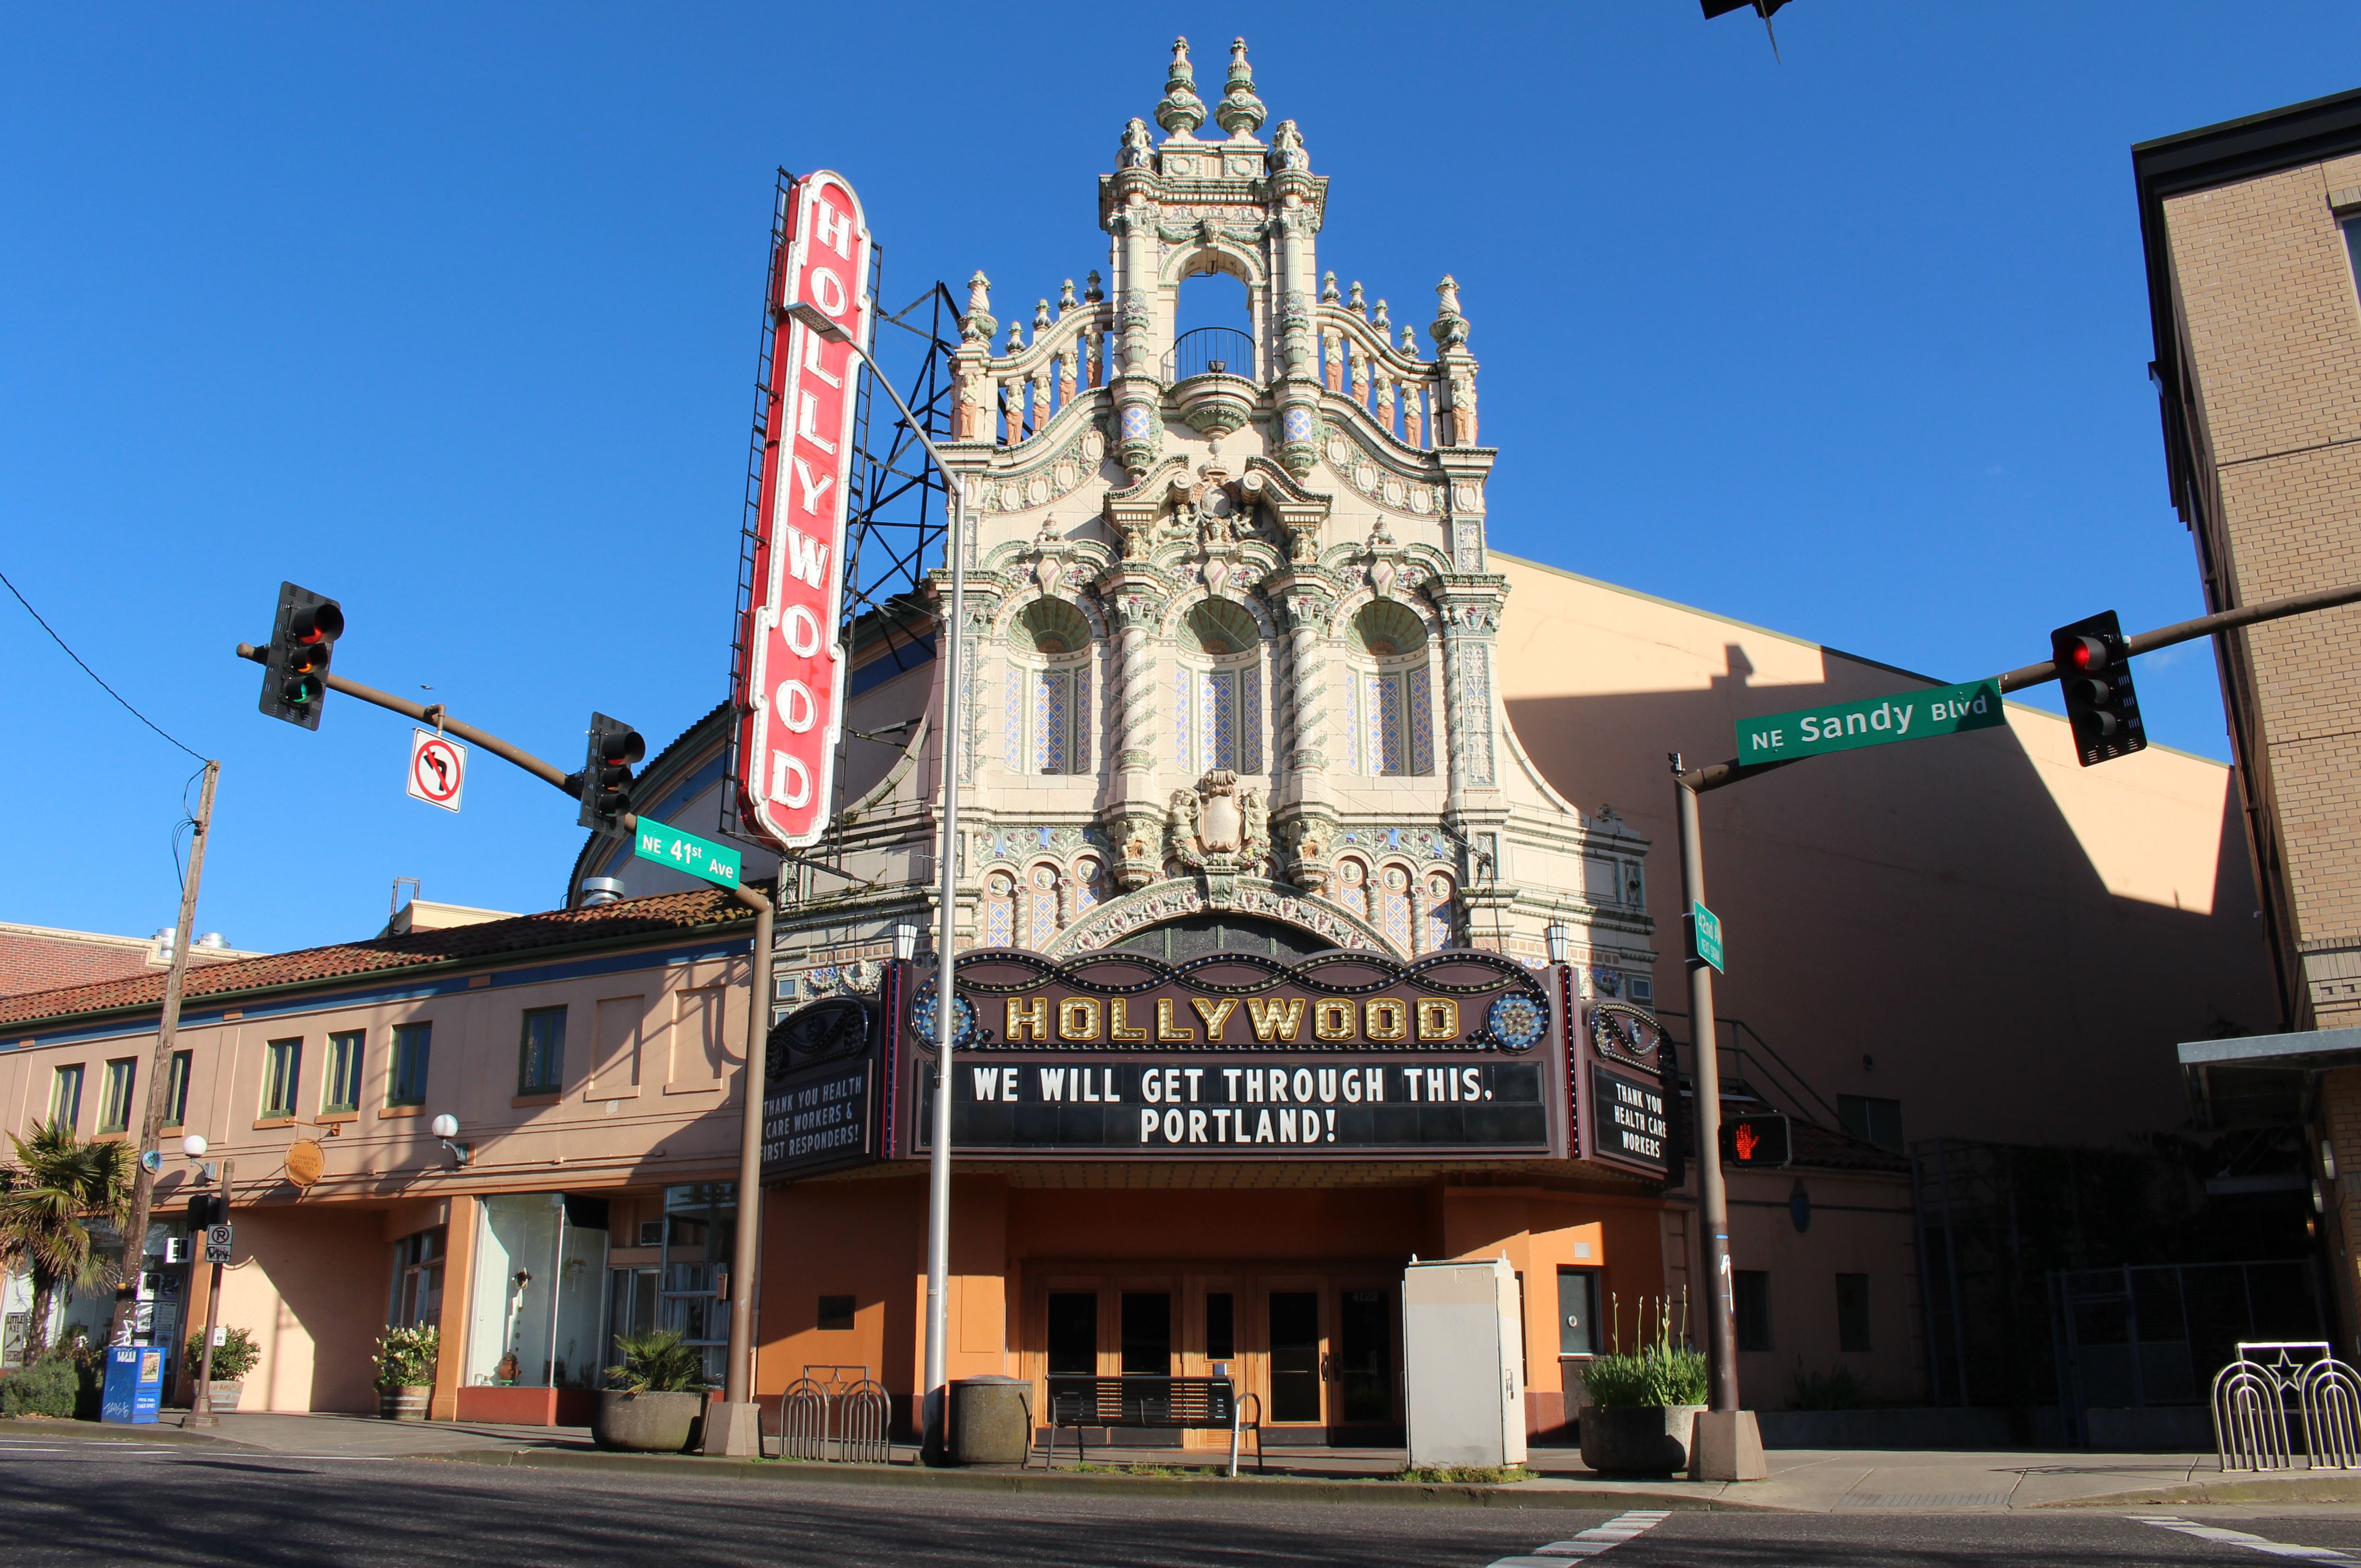 April 10, 2020 – The Hollywood Theatre has shut its doors since March but is leaving passersby with a positive message. Image by Sarah Fahmy. United States, 2020.